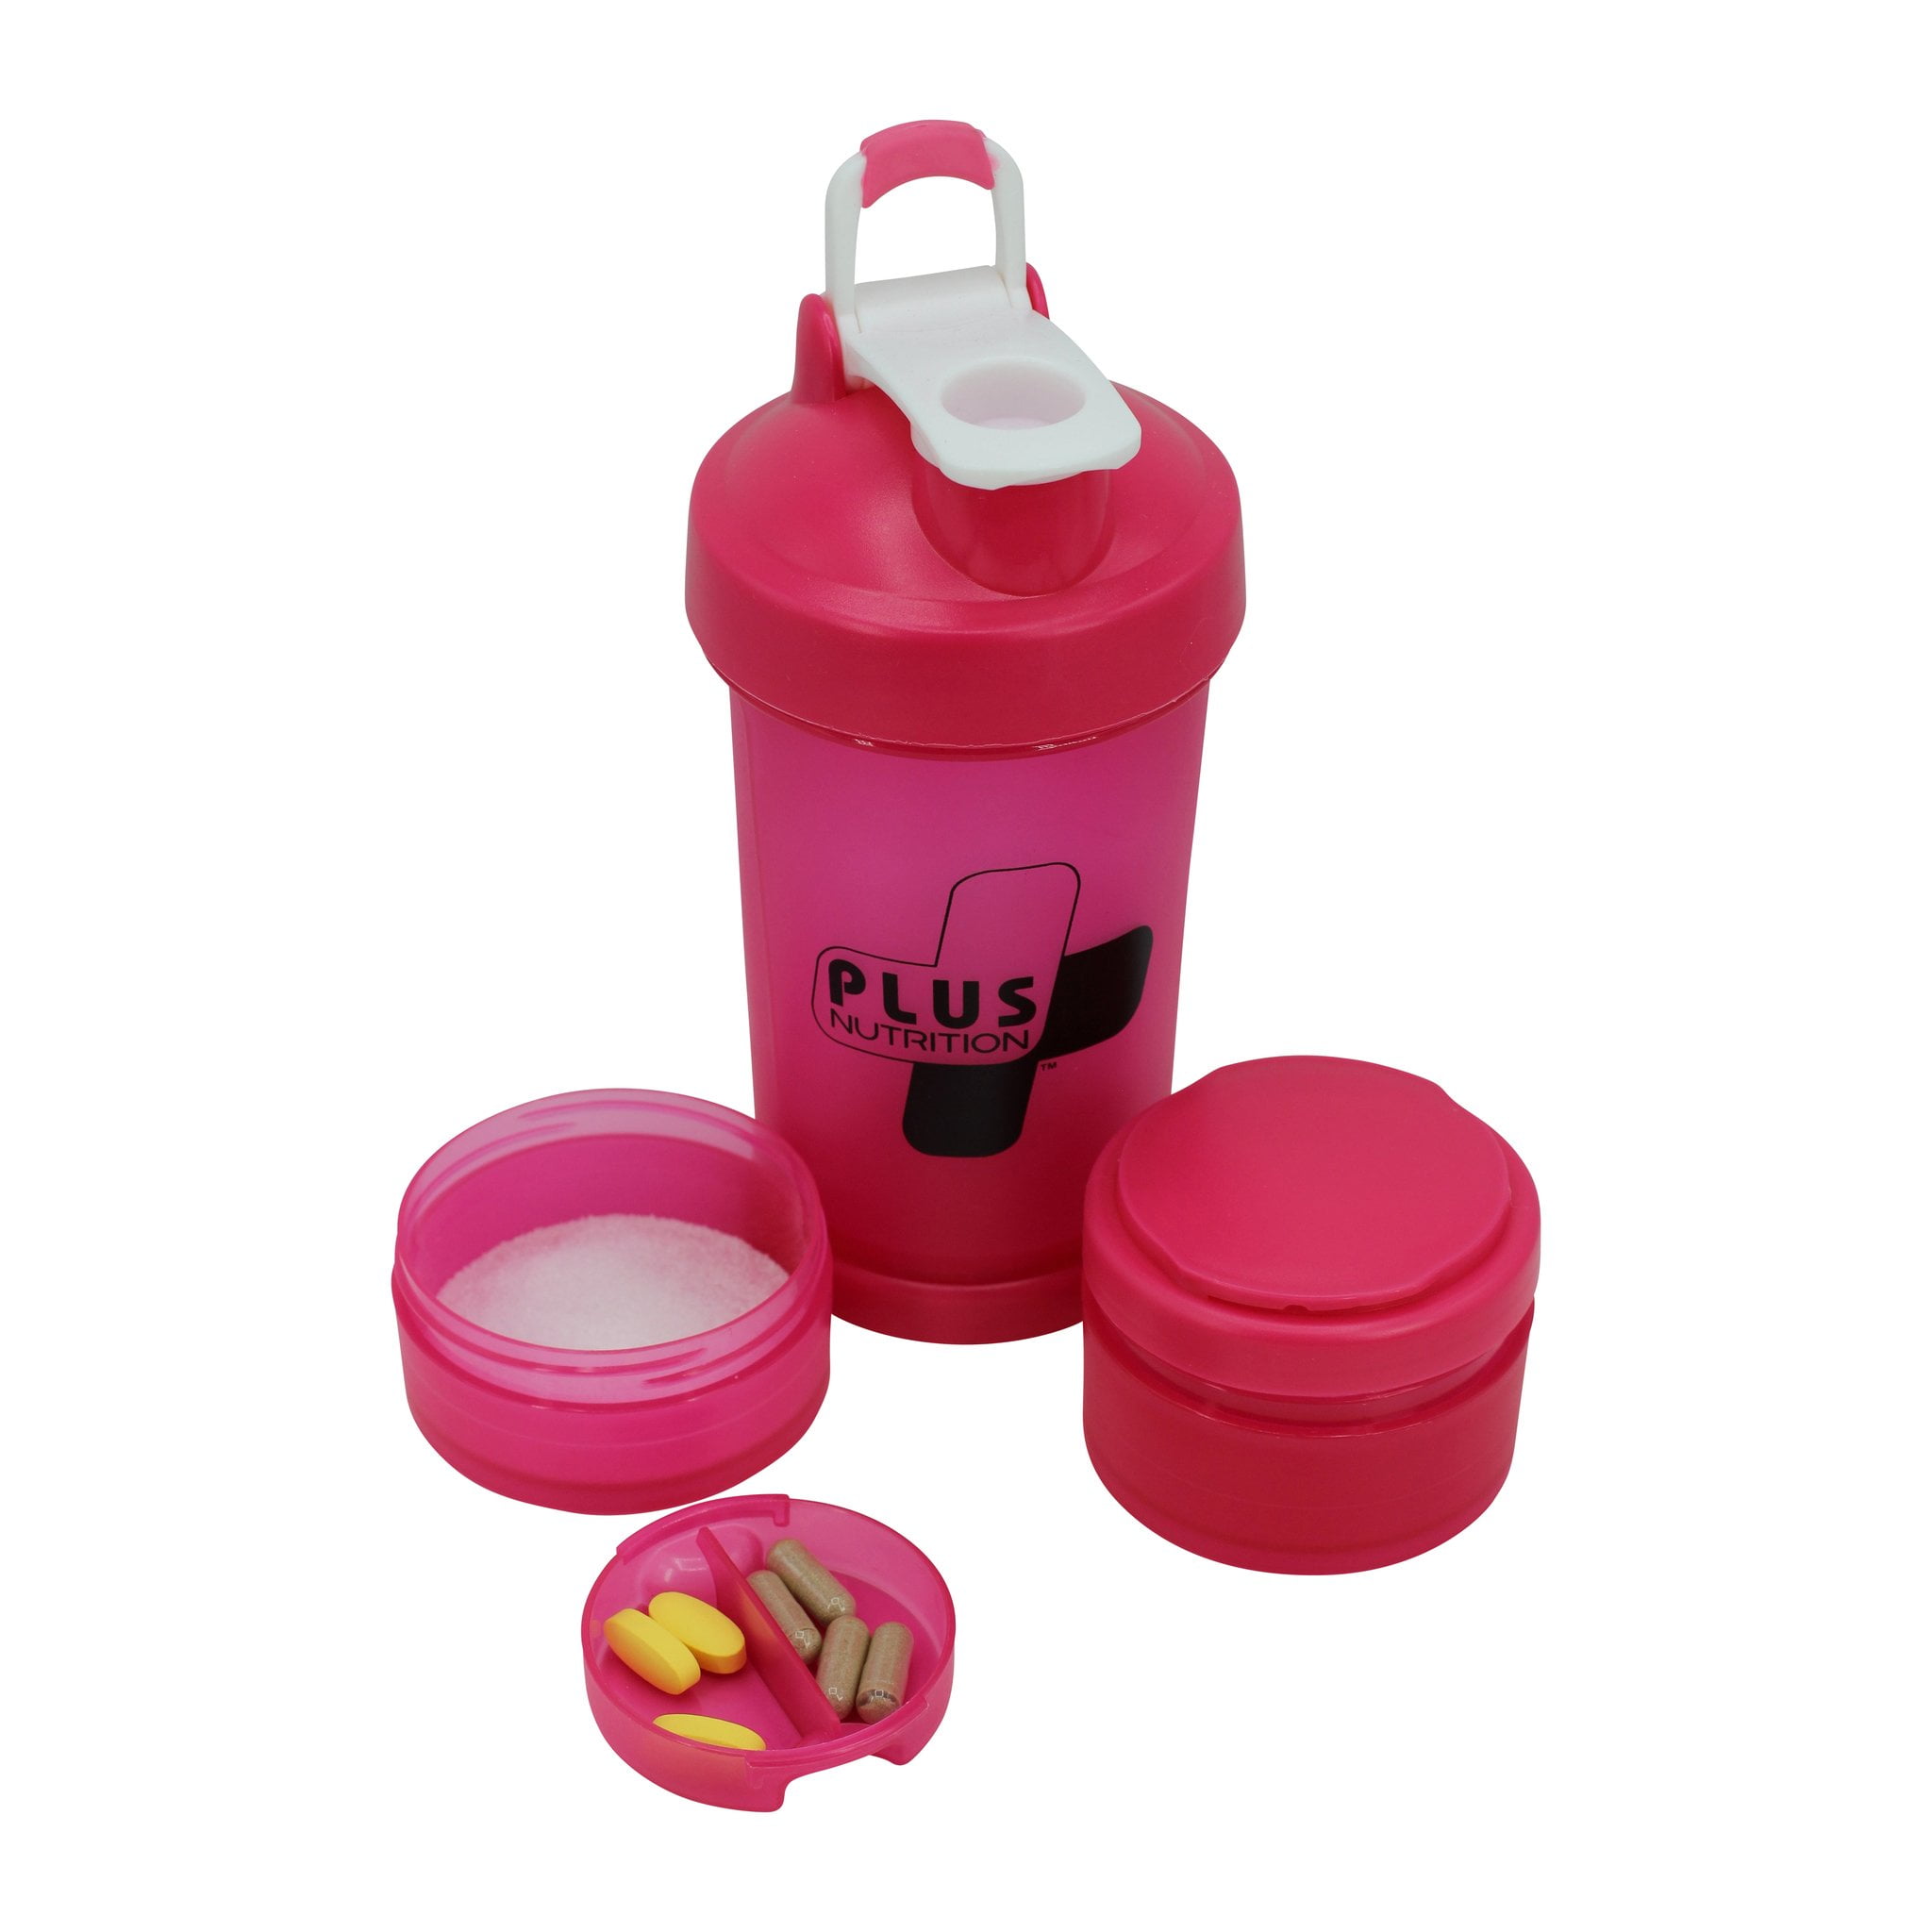 Protein Shaker Bottle Mt brain says crunches but my stomach autocorrected  to cupcakes workout bottle fun Gift